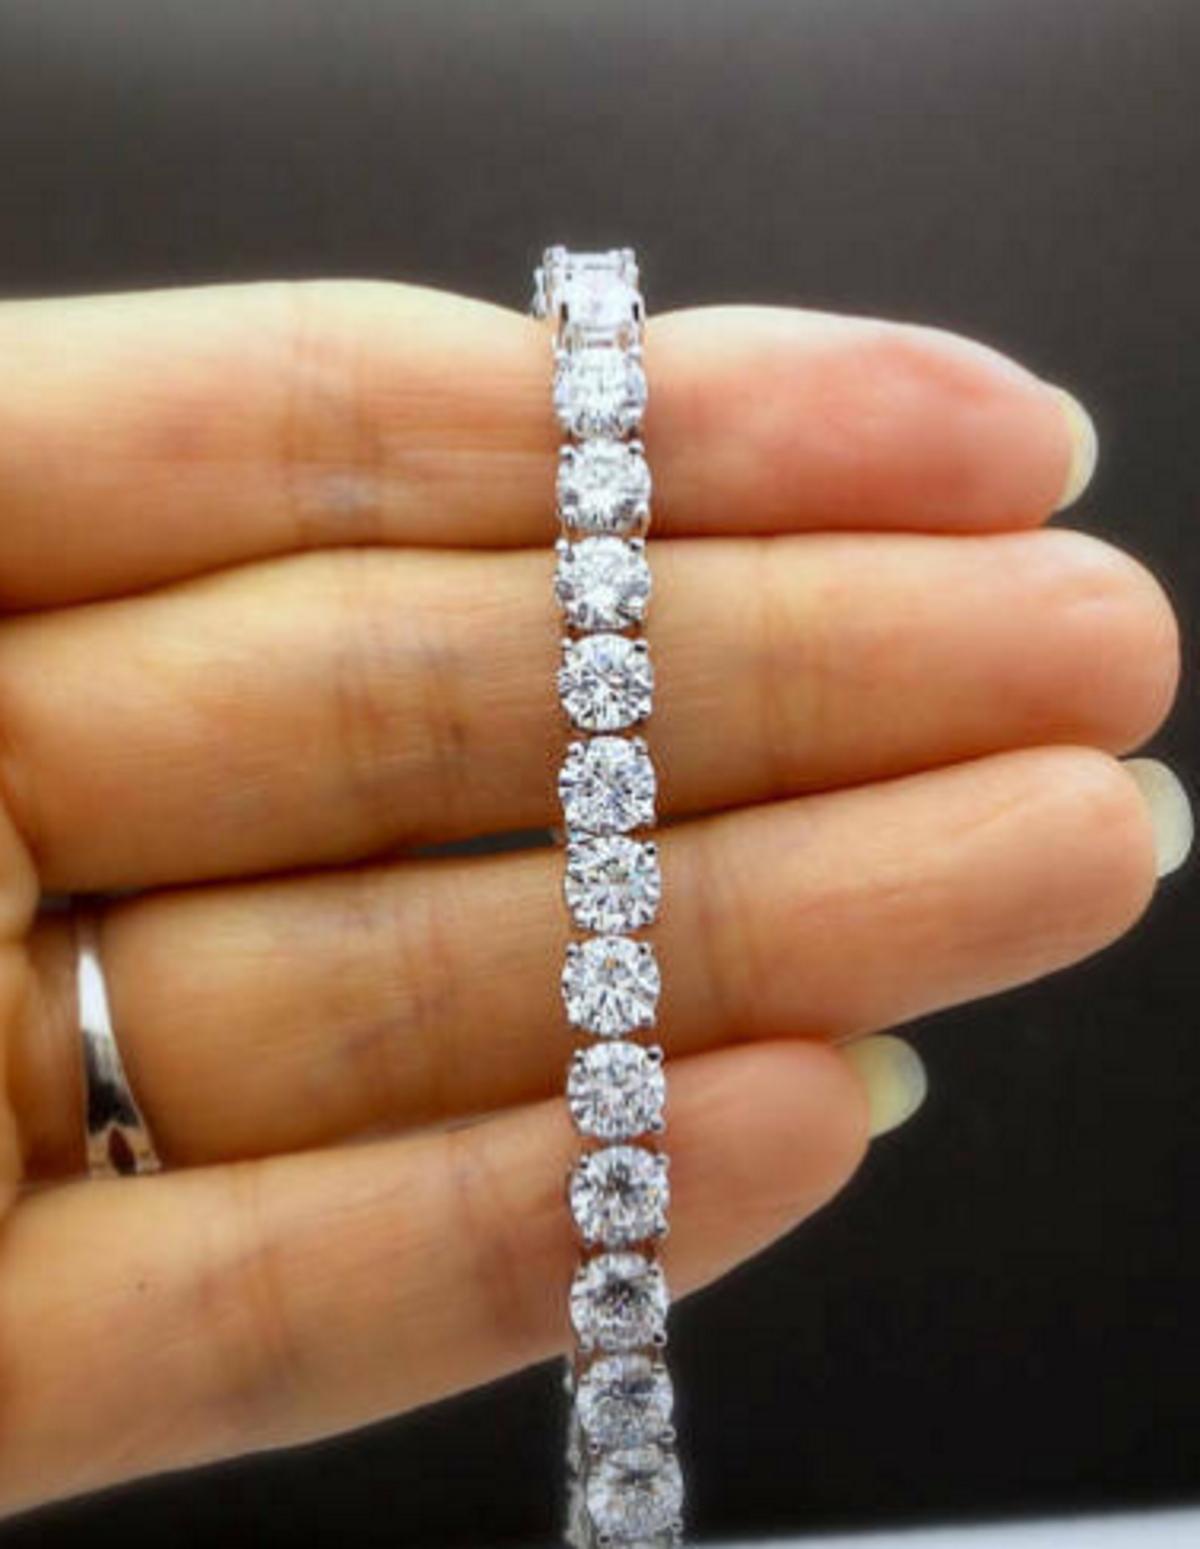 This gorgeous necklace will simply take your breath away! It features a 65 natural round brilliant cut diamonds.These sparkling diamonds conservatively grade as G/H VS1-SI1 in quality. The diamonds are set in a 18 carat white gold riviera or tennis